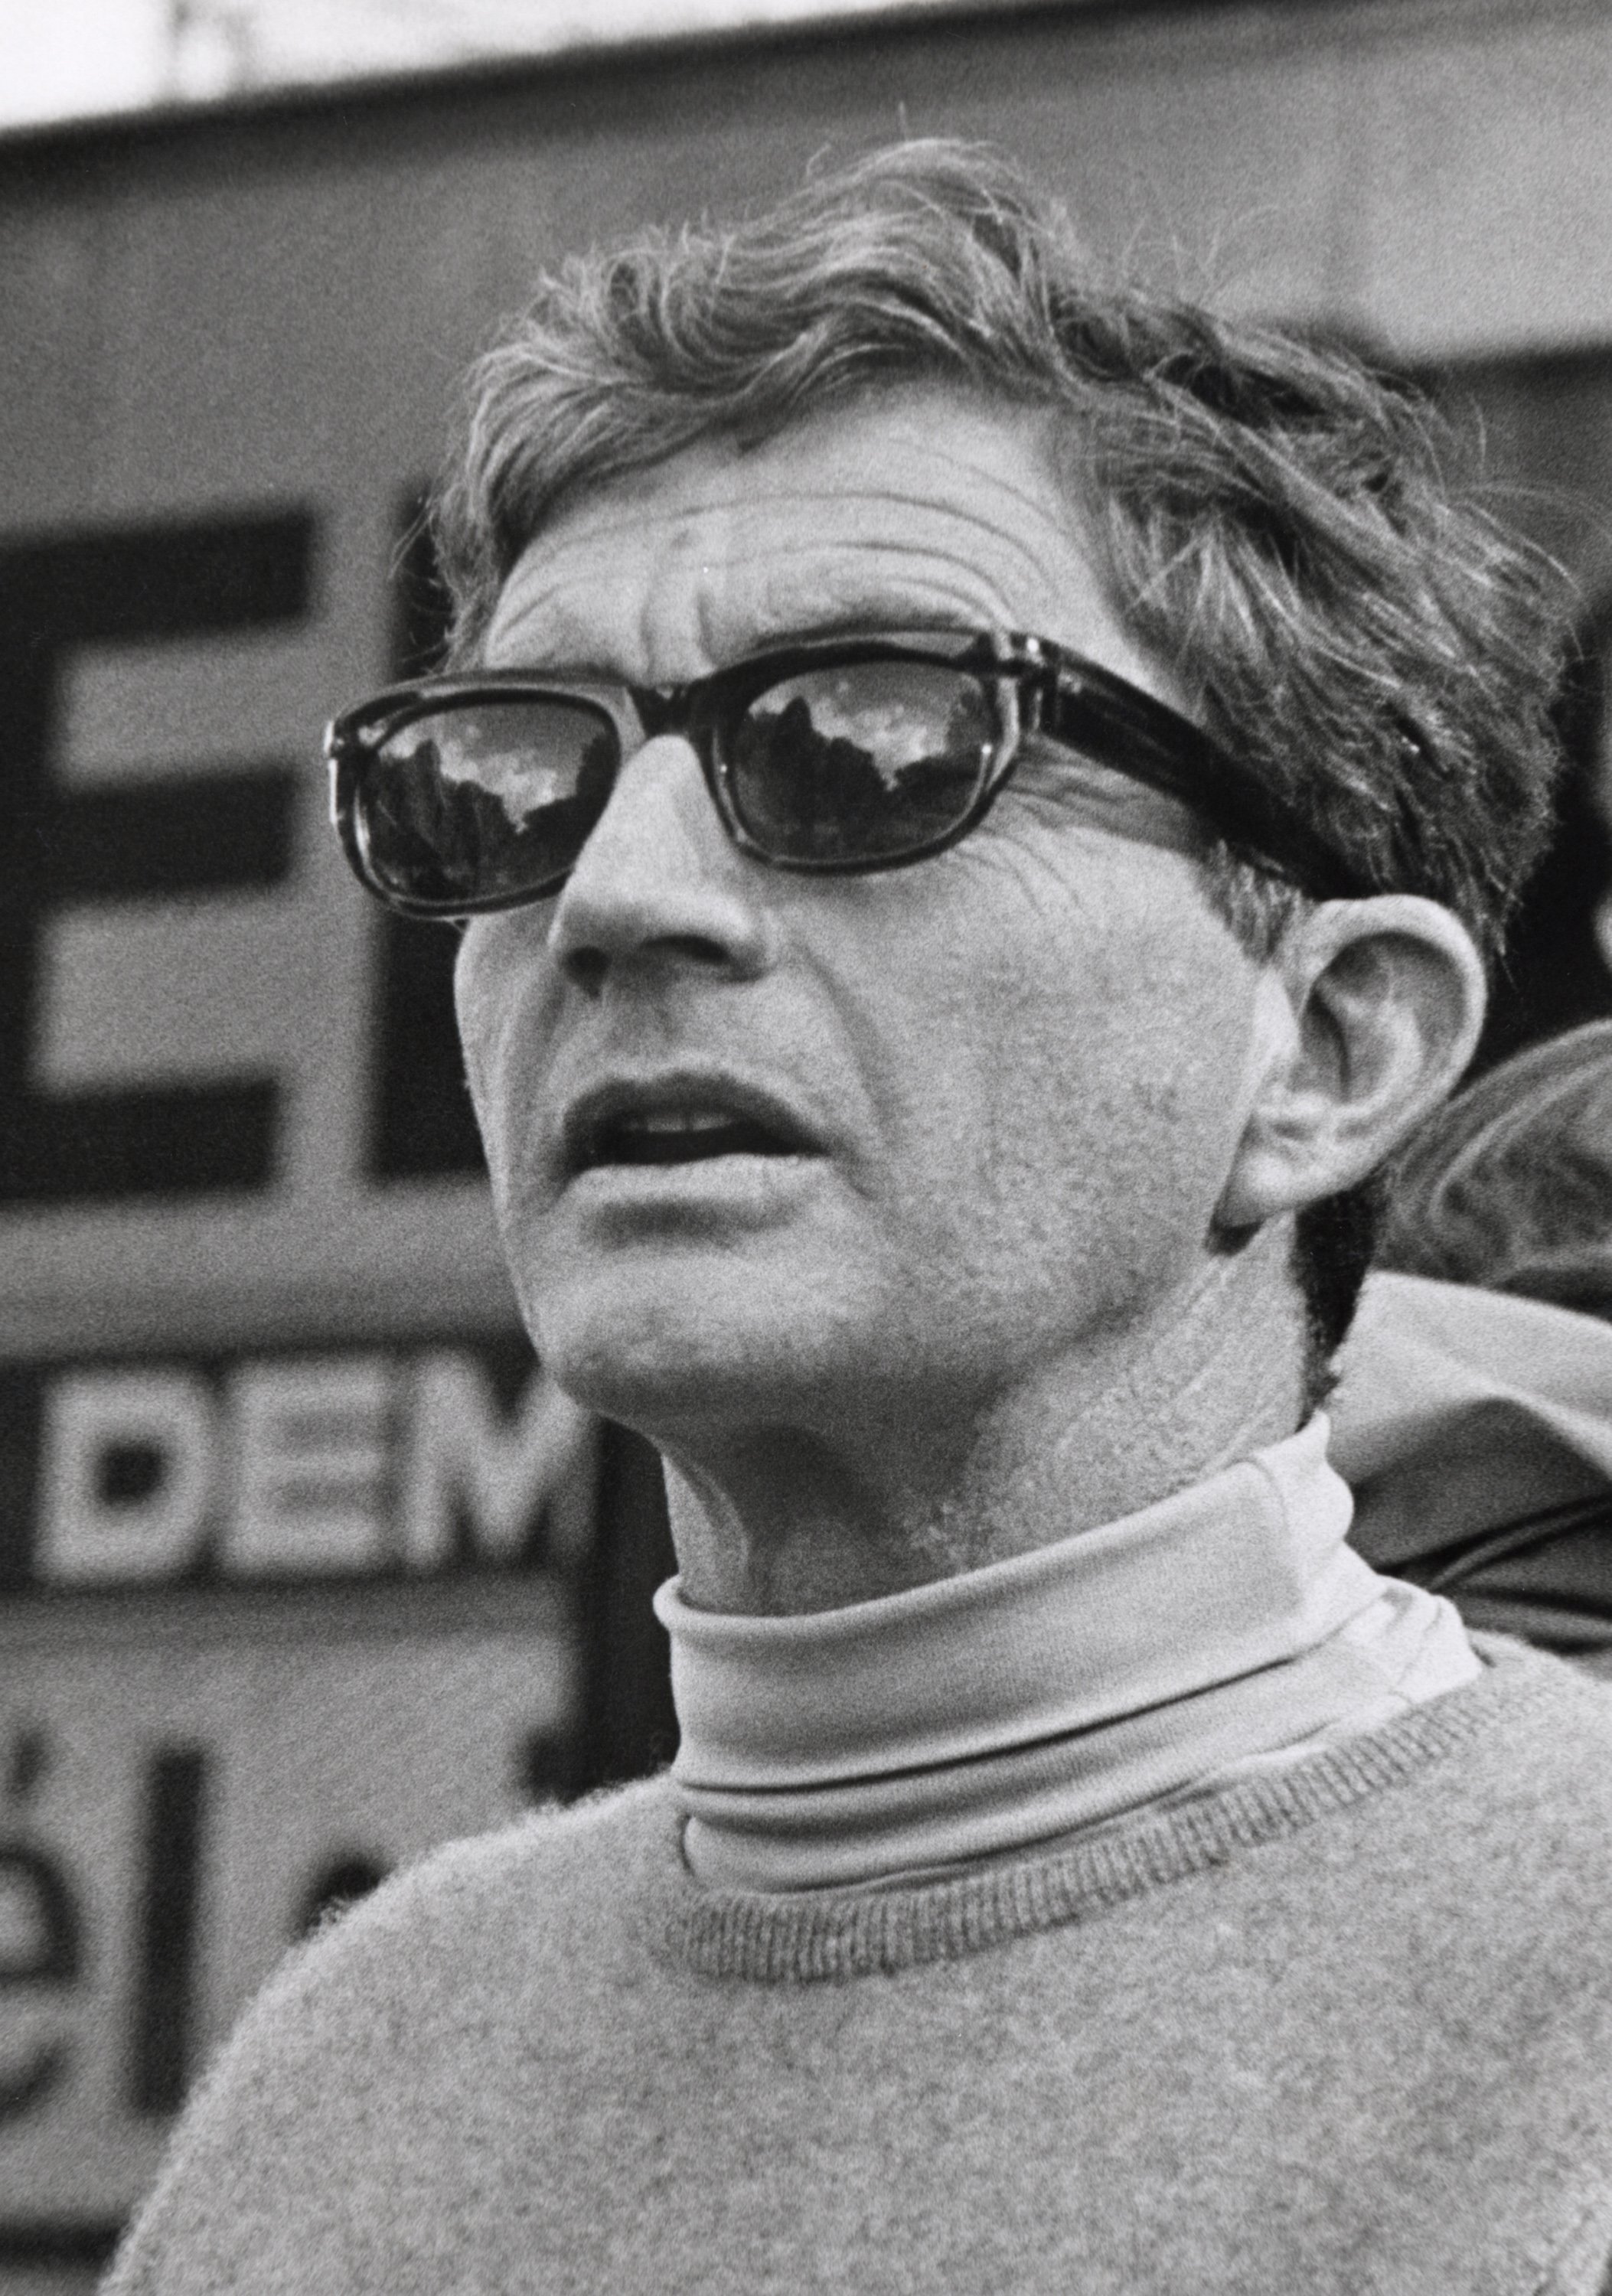 Blake Edwards at a Democratic rally on January 1, 1970. | Source: Ron Galella/Ron Galella Collection/Getty Images